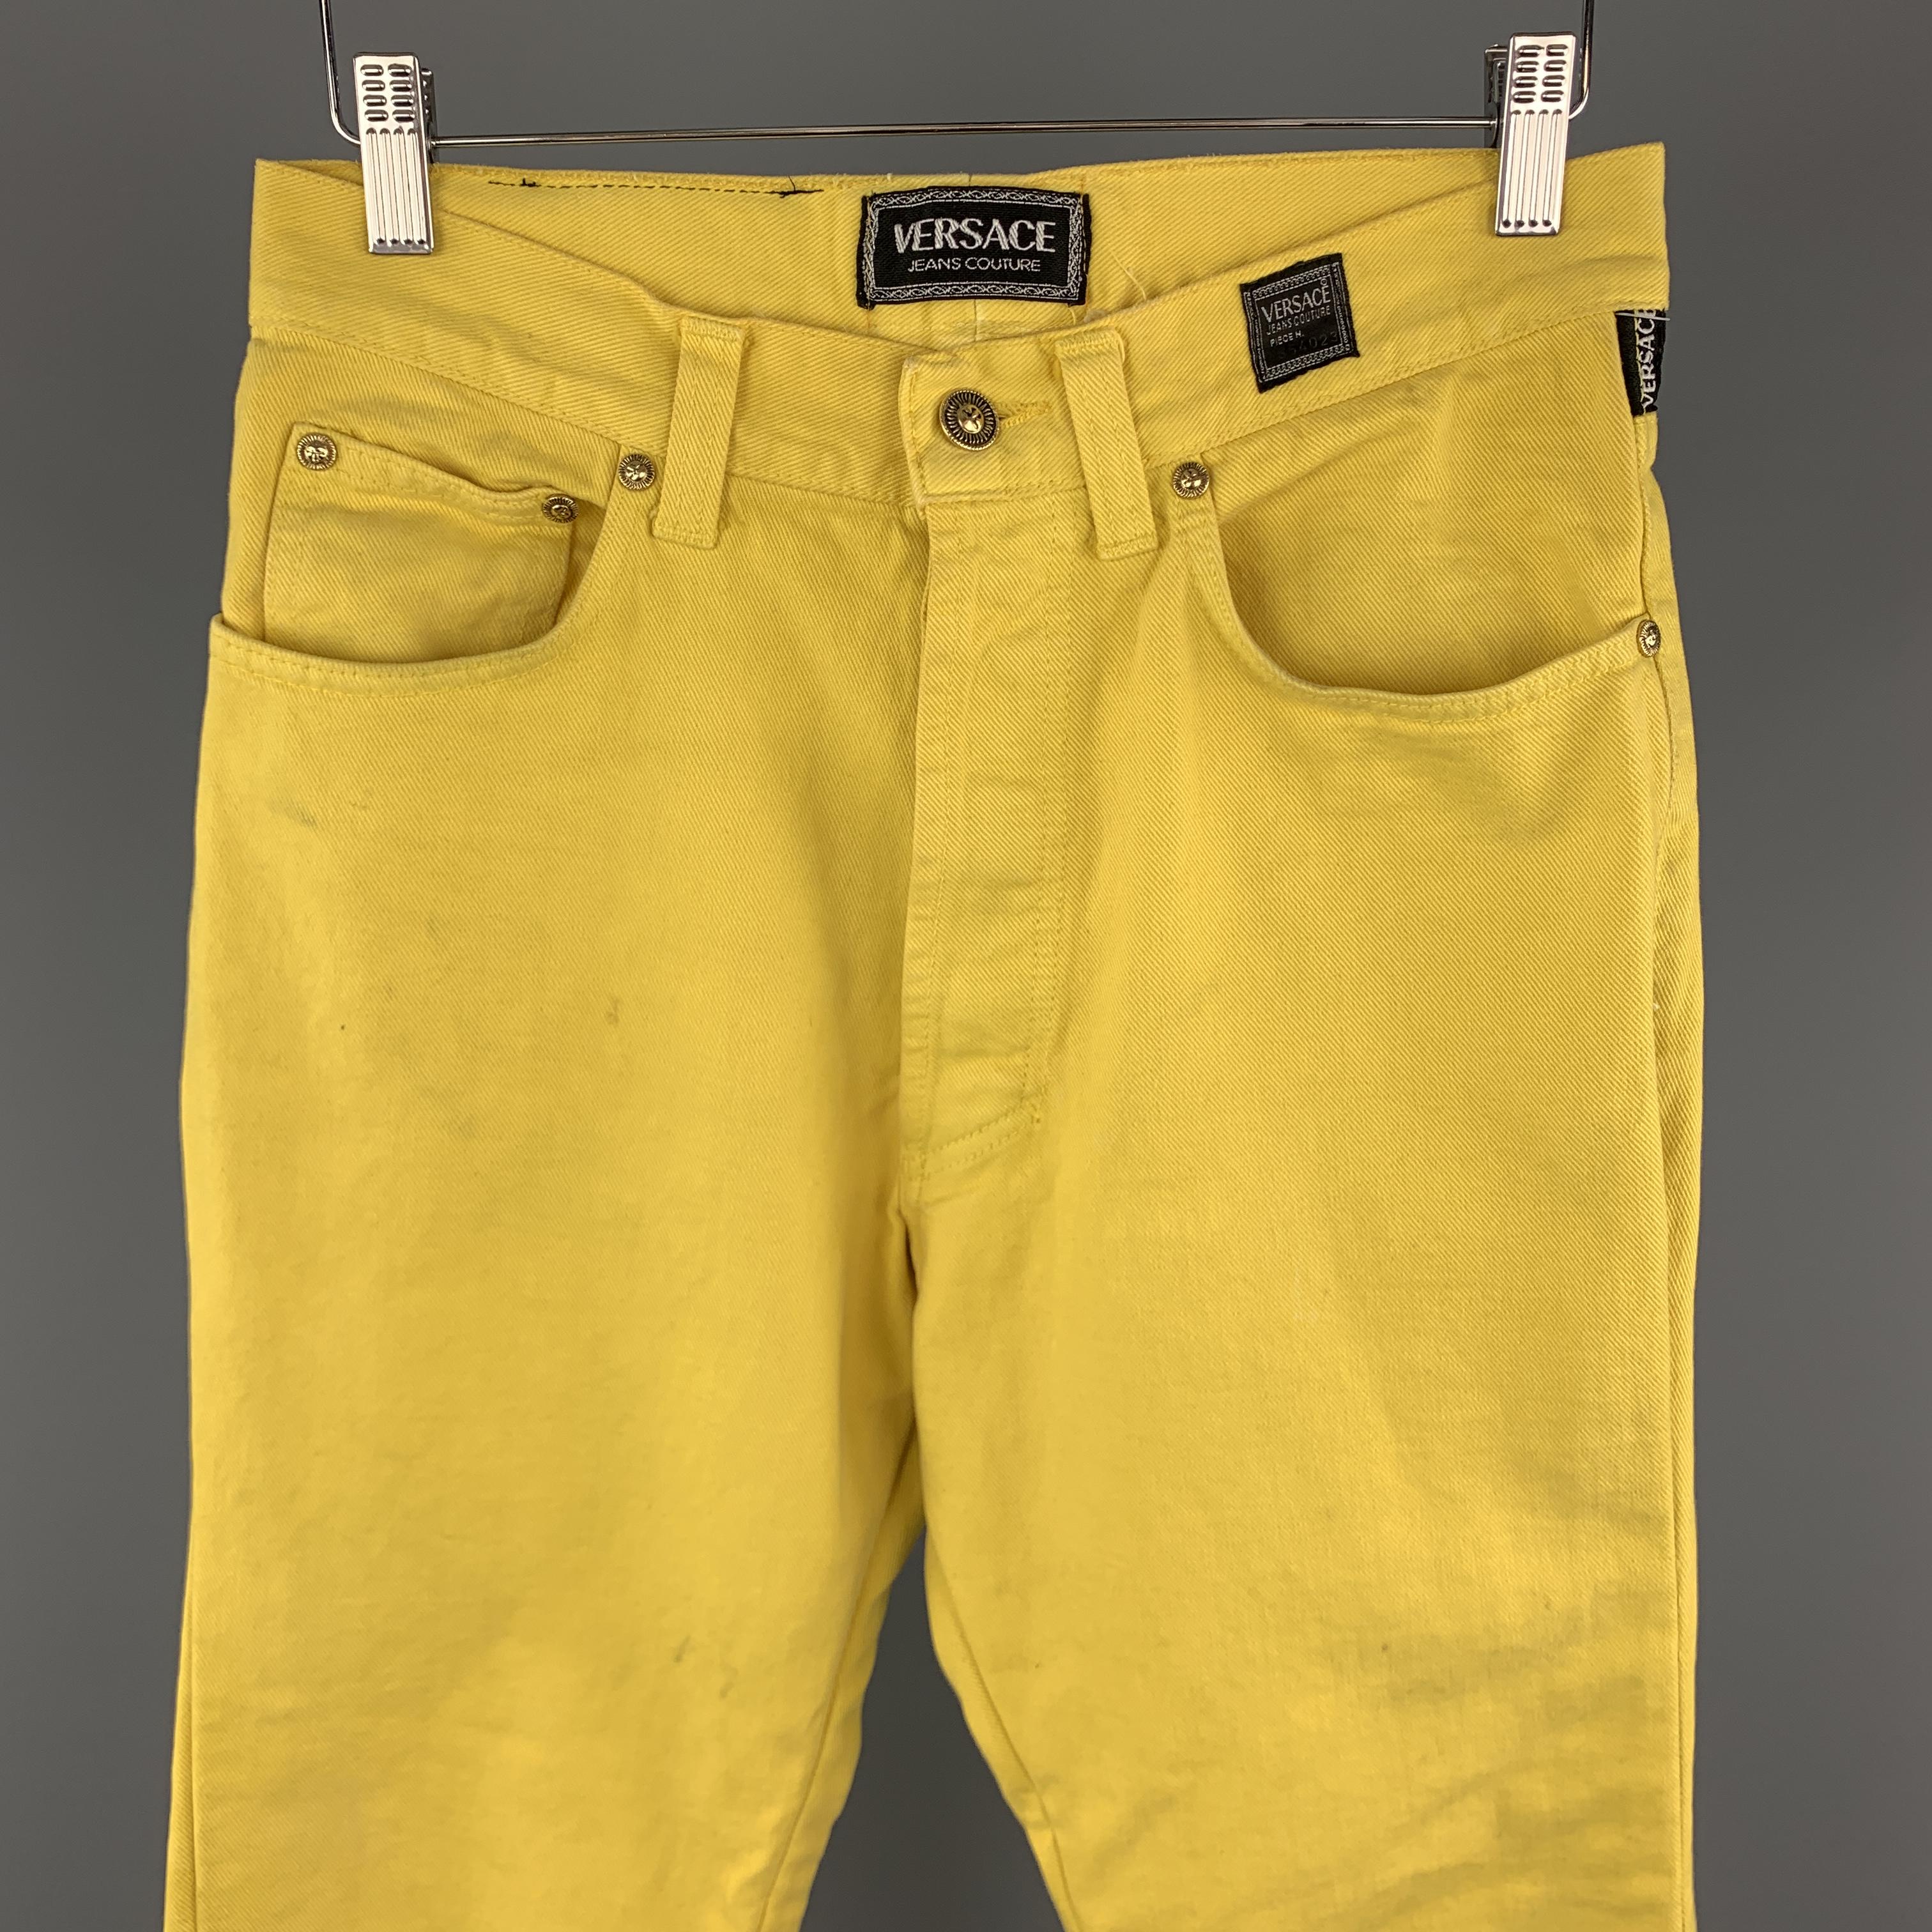 Vintage VERSACE JEANS COUTURE jeans come in yellow denim with a slim straight leg fit and gold tone sun face hardware. Wear throughout. As-is. Made in Italy.

Good Pre-Owned Condition.
Marked: 34 48

Measurements:

Waist: 30 in.
Rise: 12 in.